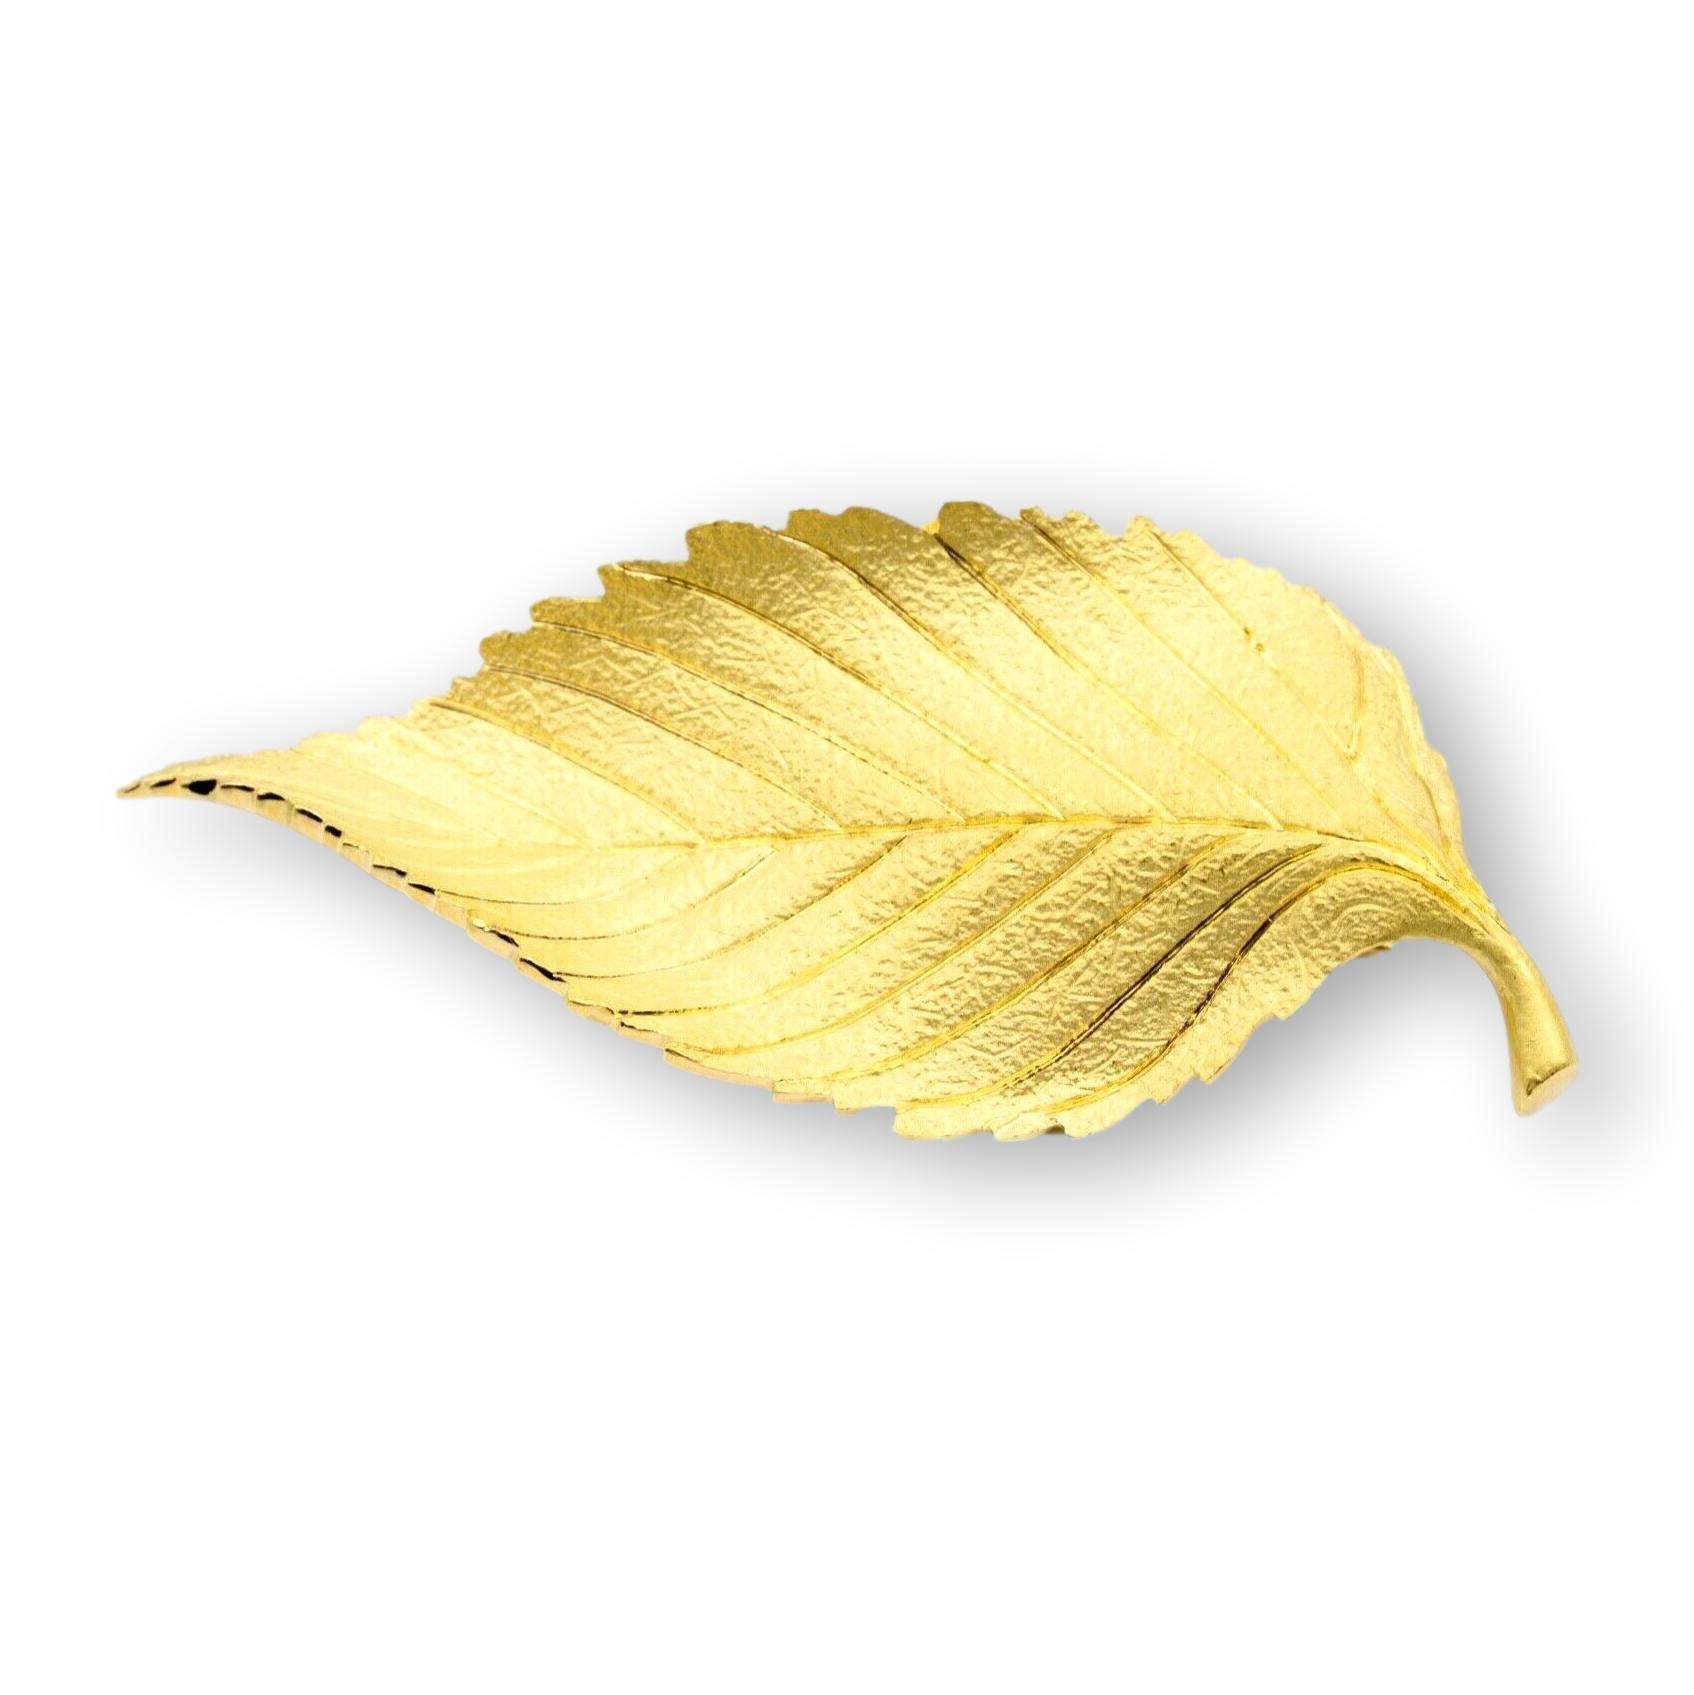 This elegant Tiffany & Co. Vintage Beech Leaf brooch is finely crafted in 18 Karat Yellow gold with a Florentine matte finish at the front and high polish gold at the back.

Stamp: Tiffany & Co. 750
Length: 2.0 cm
Width:1.0 cm
Weight: 10.8